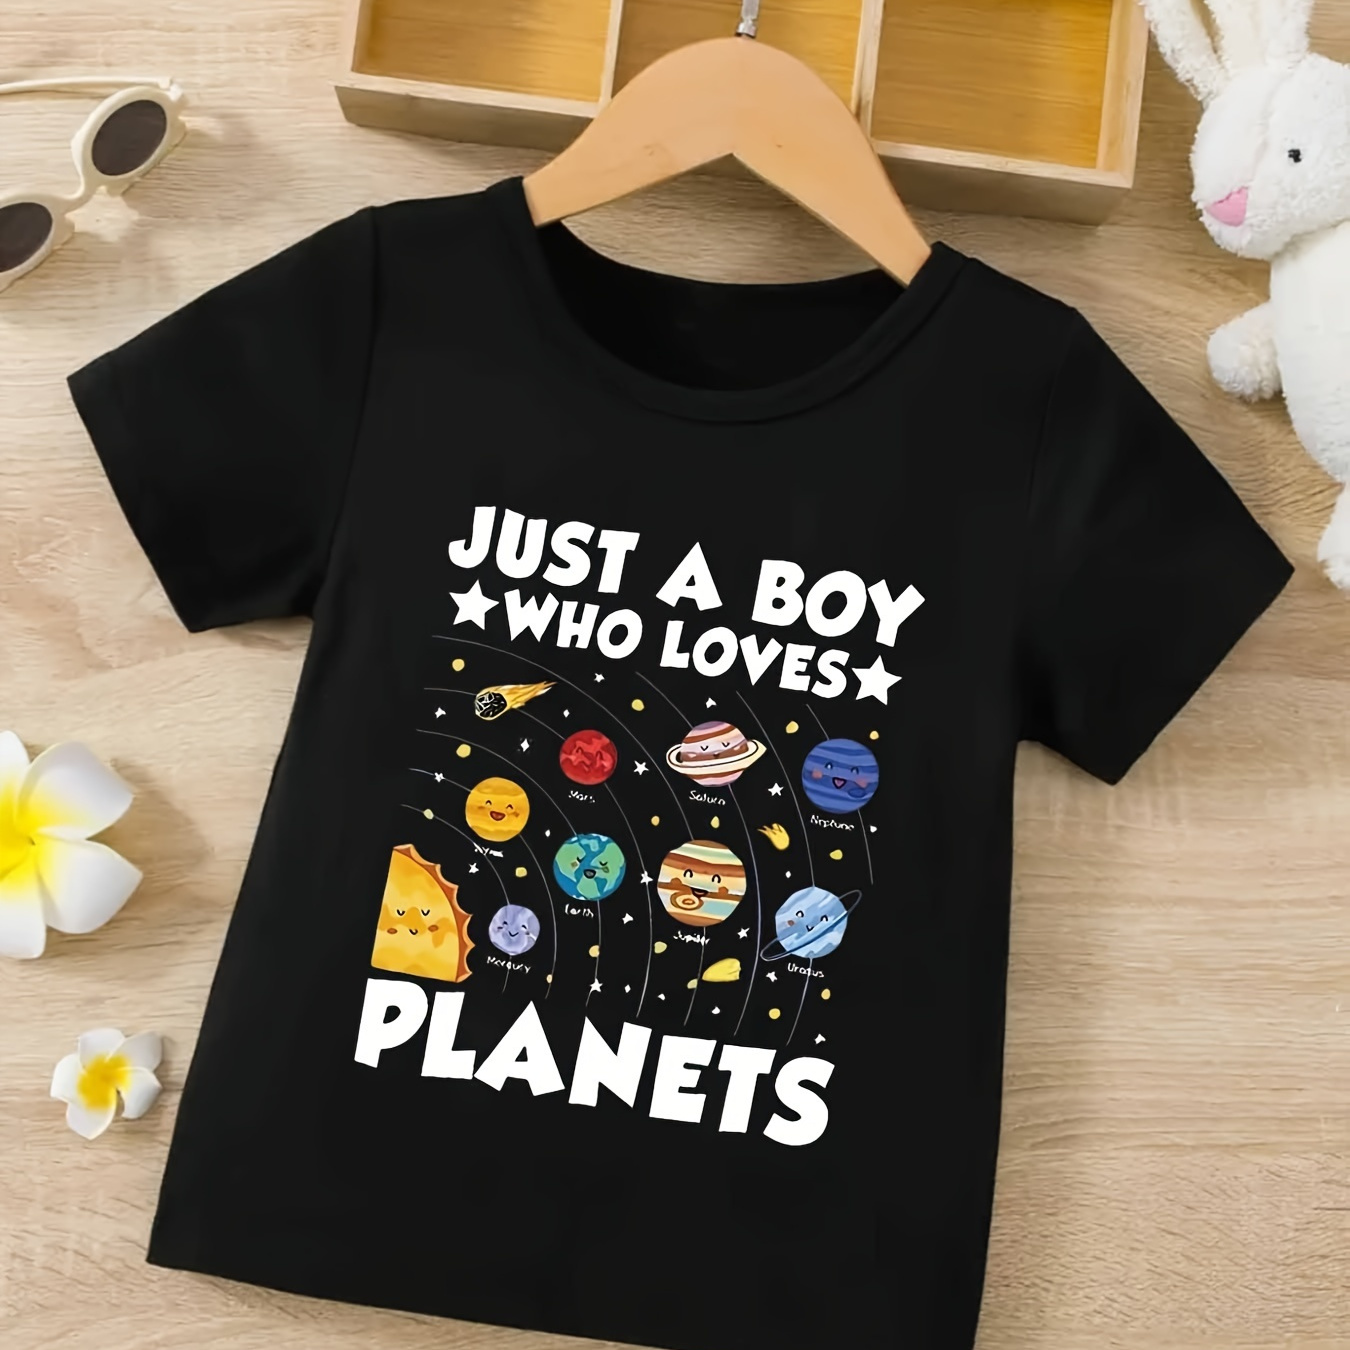 

Just A Boy Who Loves Planets Print Crew Neck T-shirt For Boys, Casual Short Sleeve Top, Boy's Clothing For Summer Daily Wear